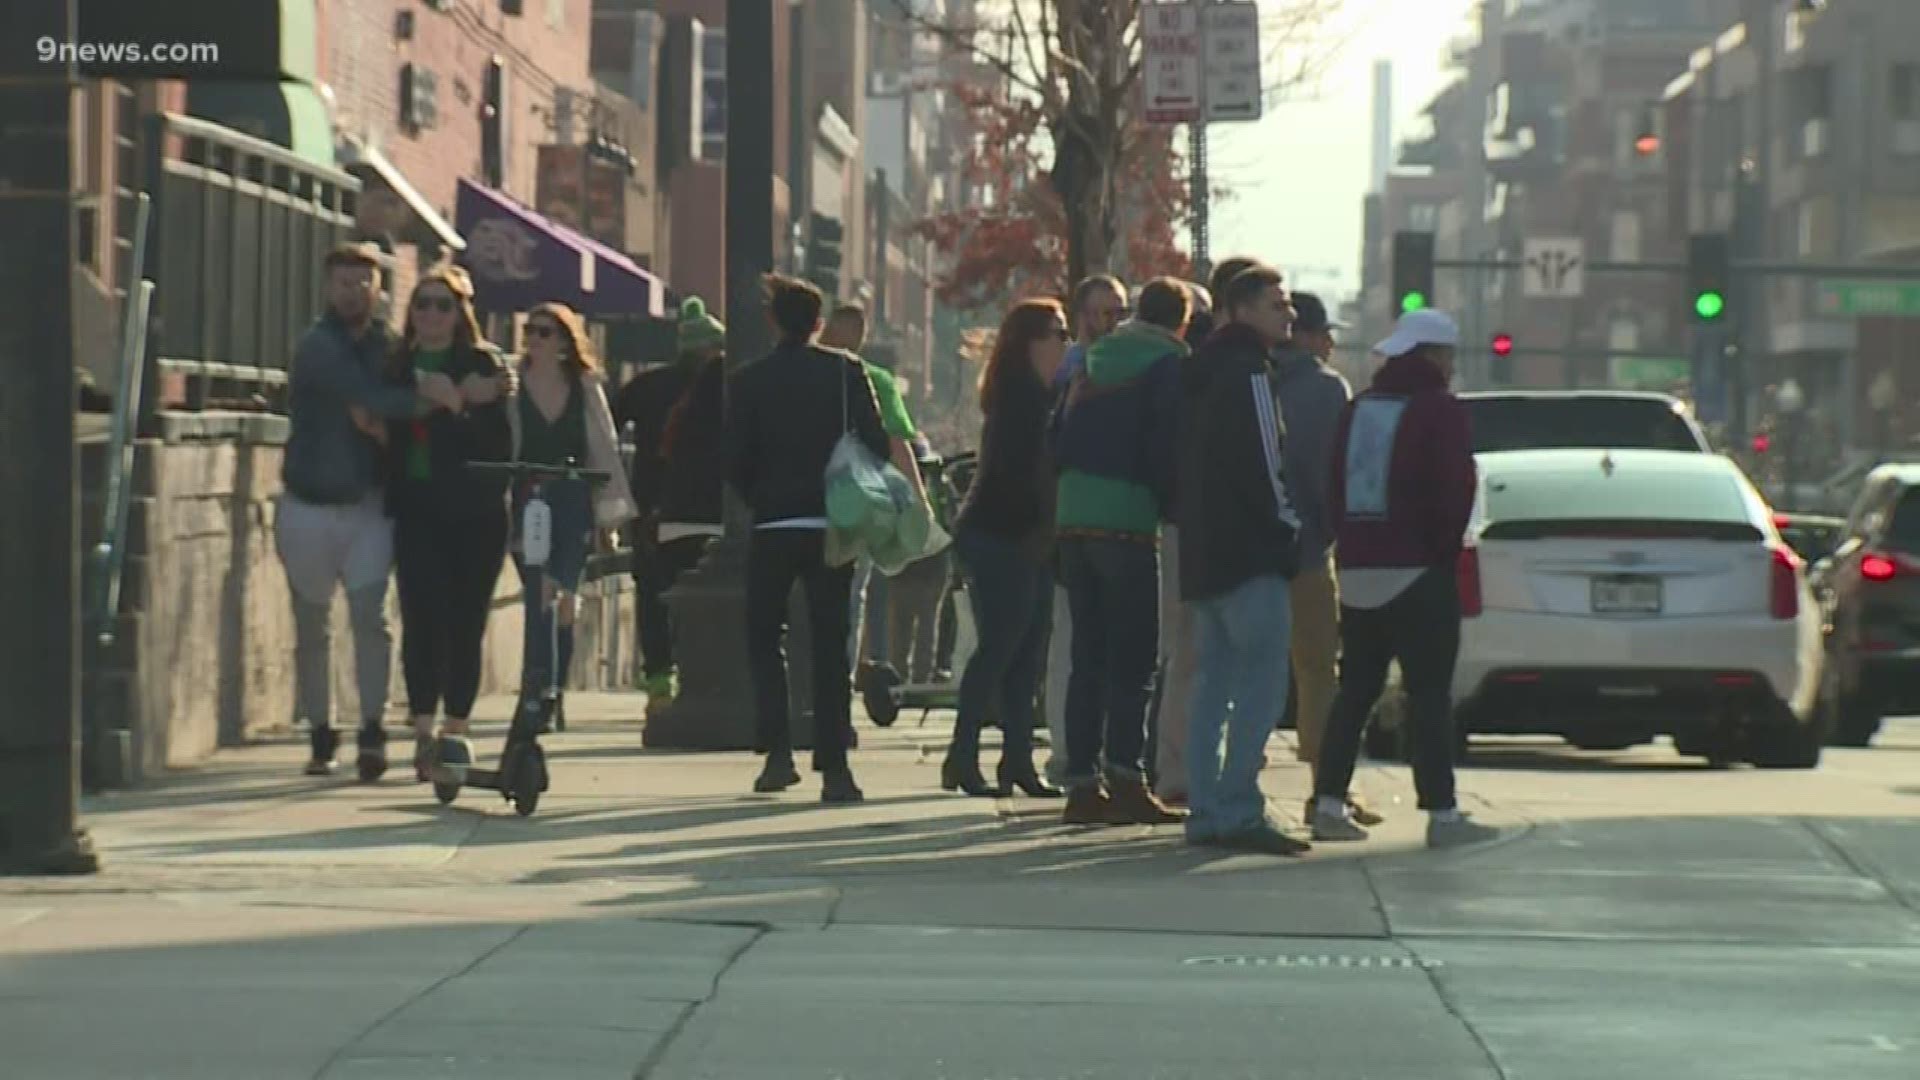 Despite the cancellation of most public events due to the coronavirus and calls for social distancing, downtown Denver bars were still crowded for St. Patrick's Day.